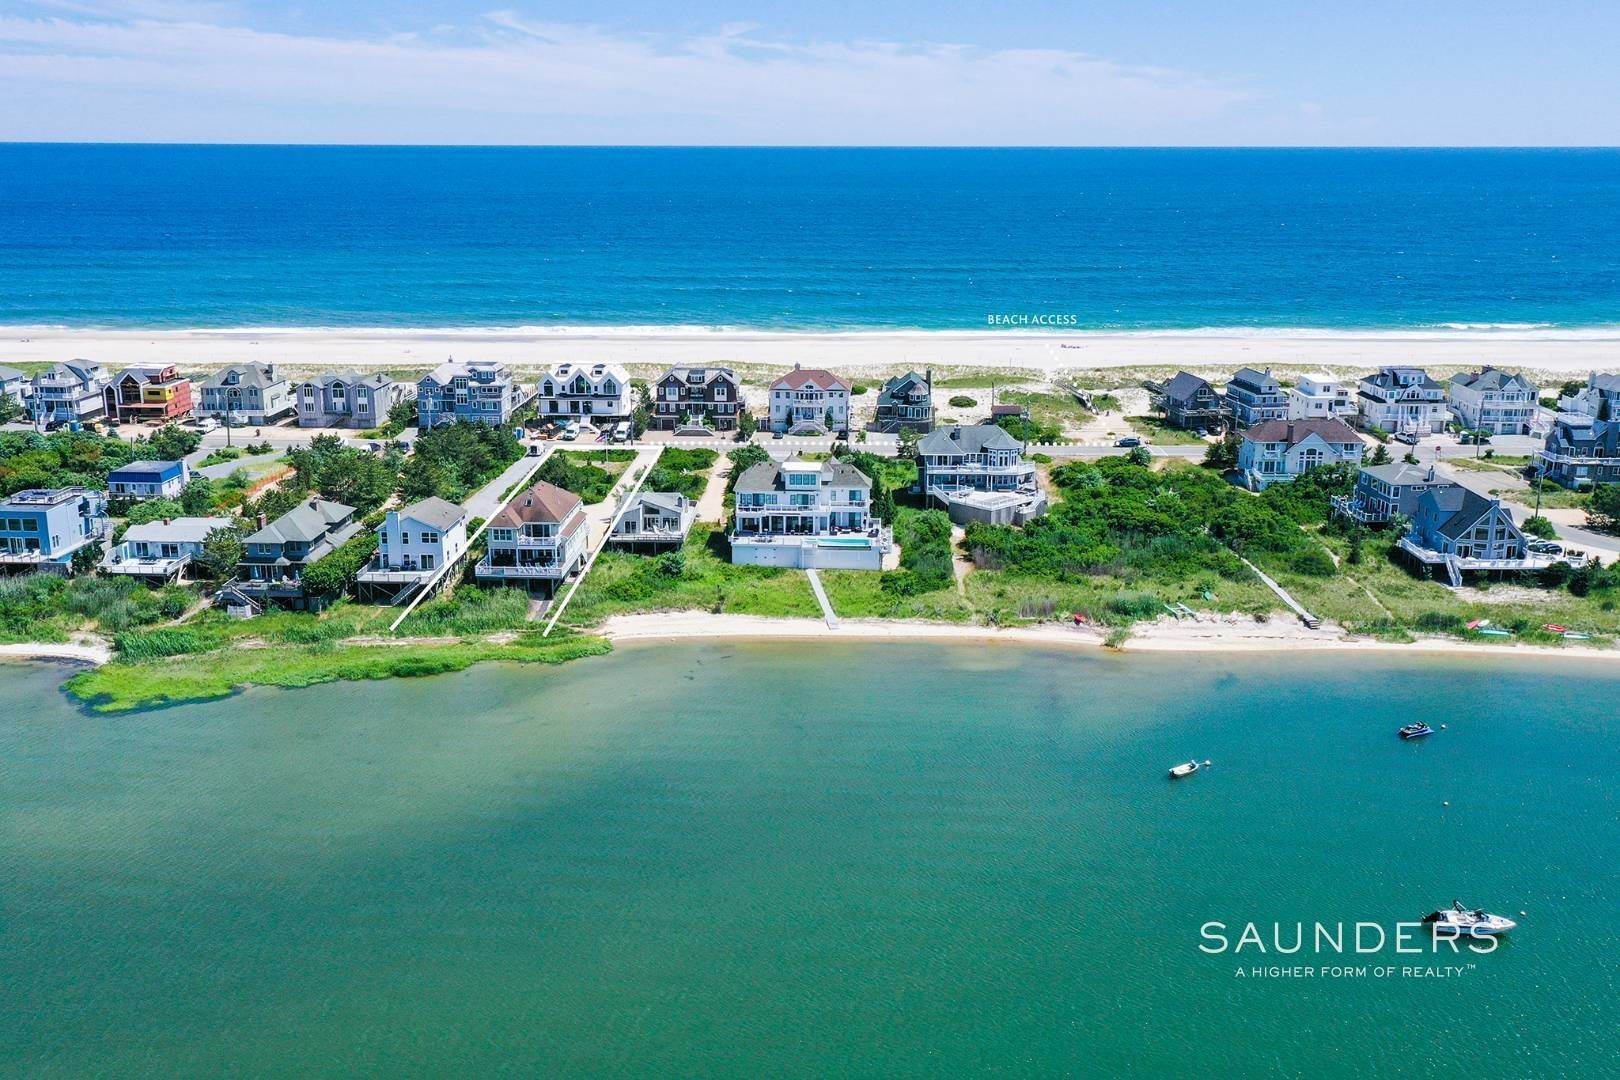 Single Family Homes for Sale at Waterfront Beauty With Sandy Bay Beach 854 Dune Road, Westhampton Dunes Village, NY 11978